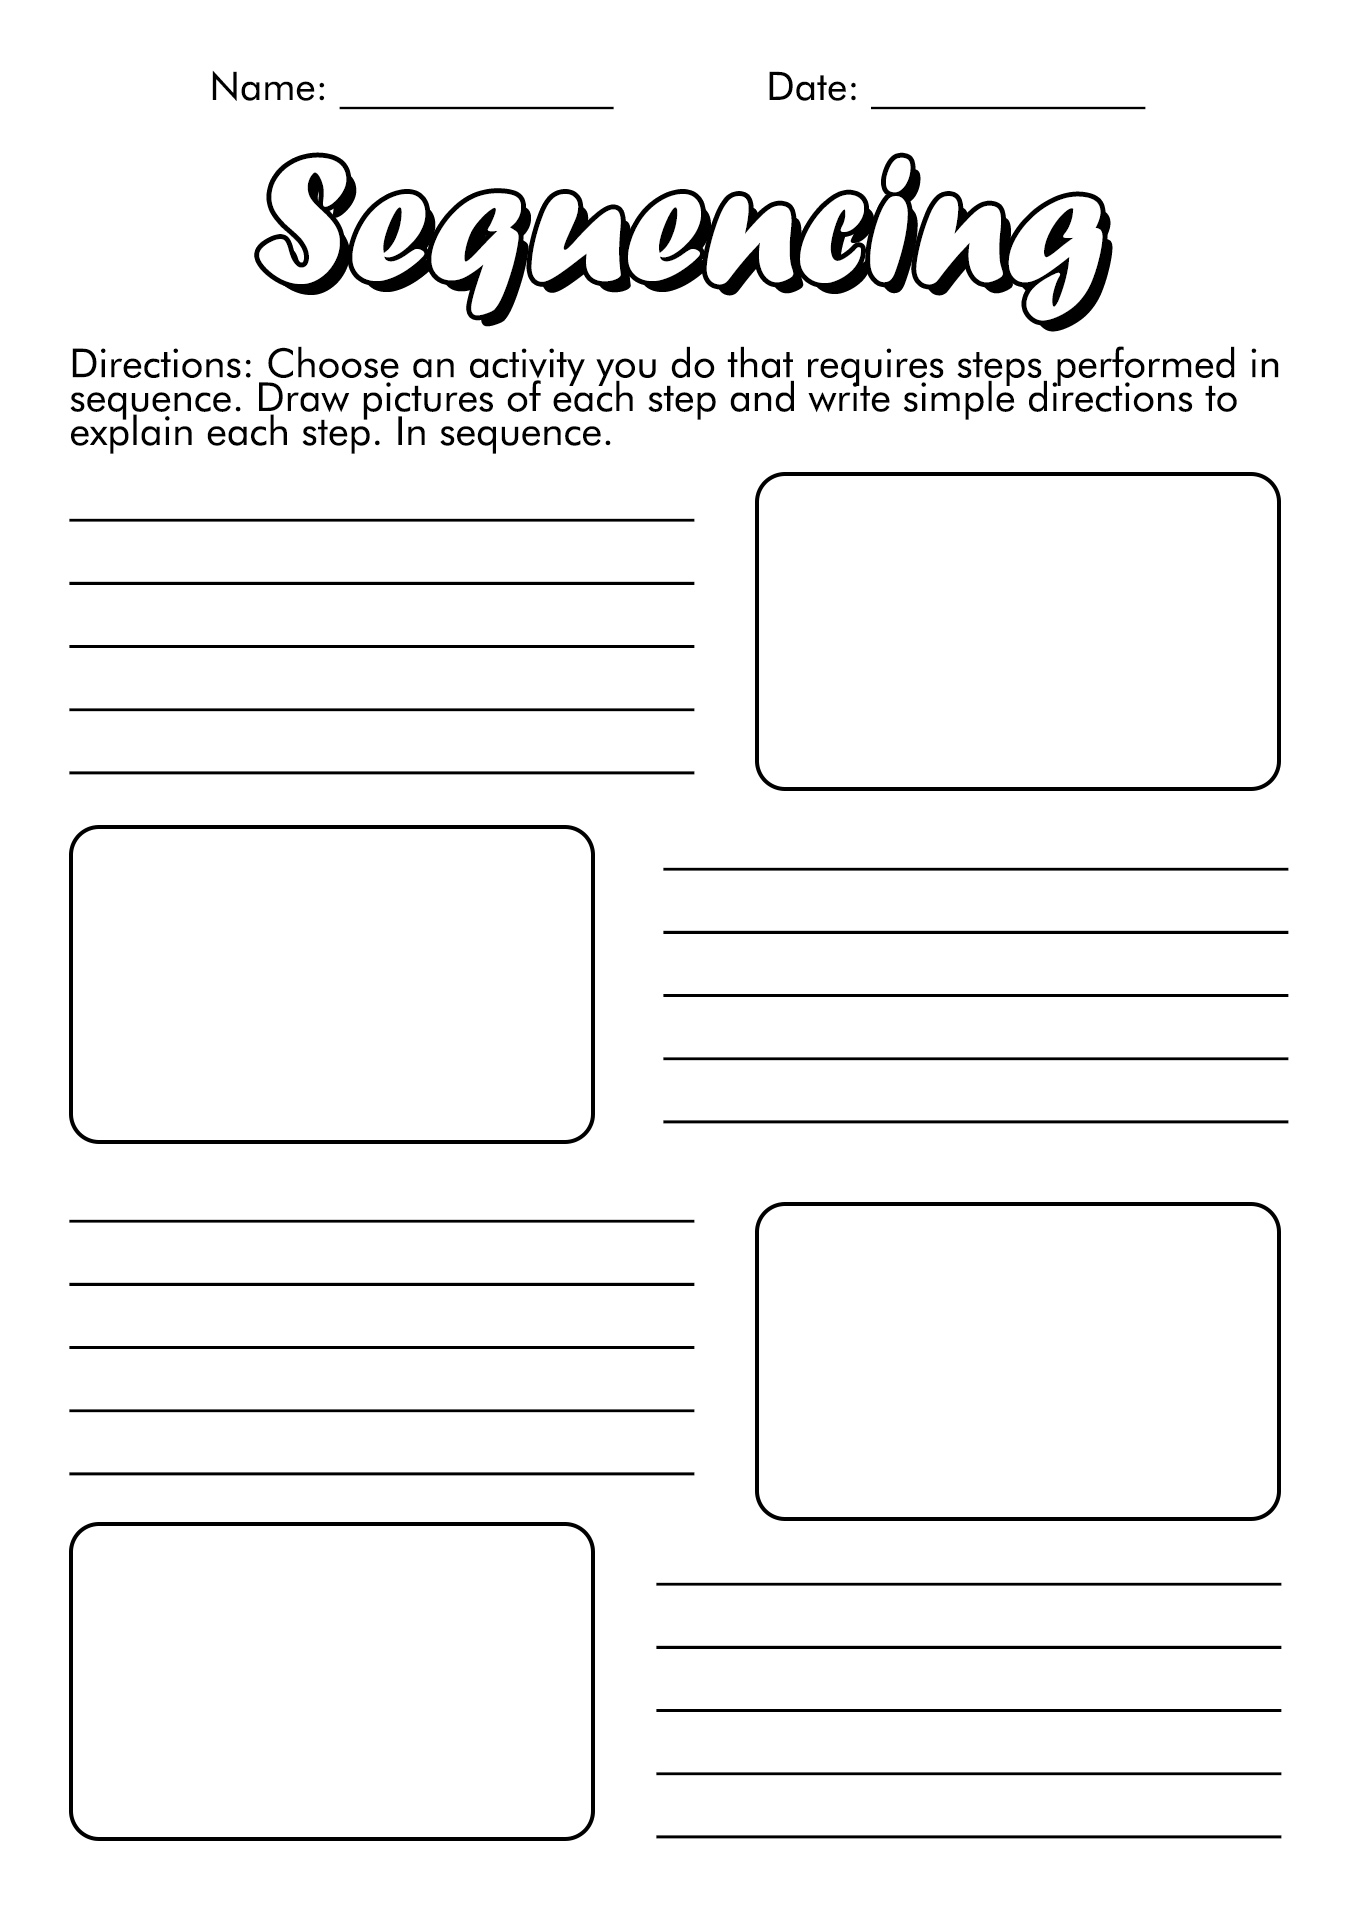 13-best-images-of-3-pictures-sequencing-worksheets-sequencing-story-events-worksheets-daily